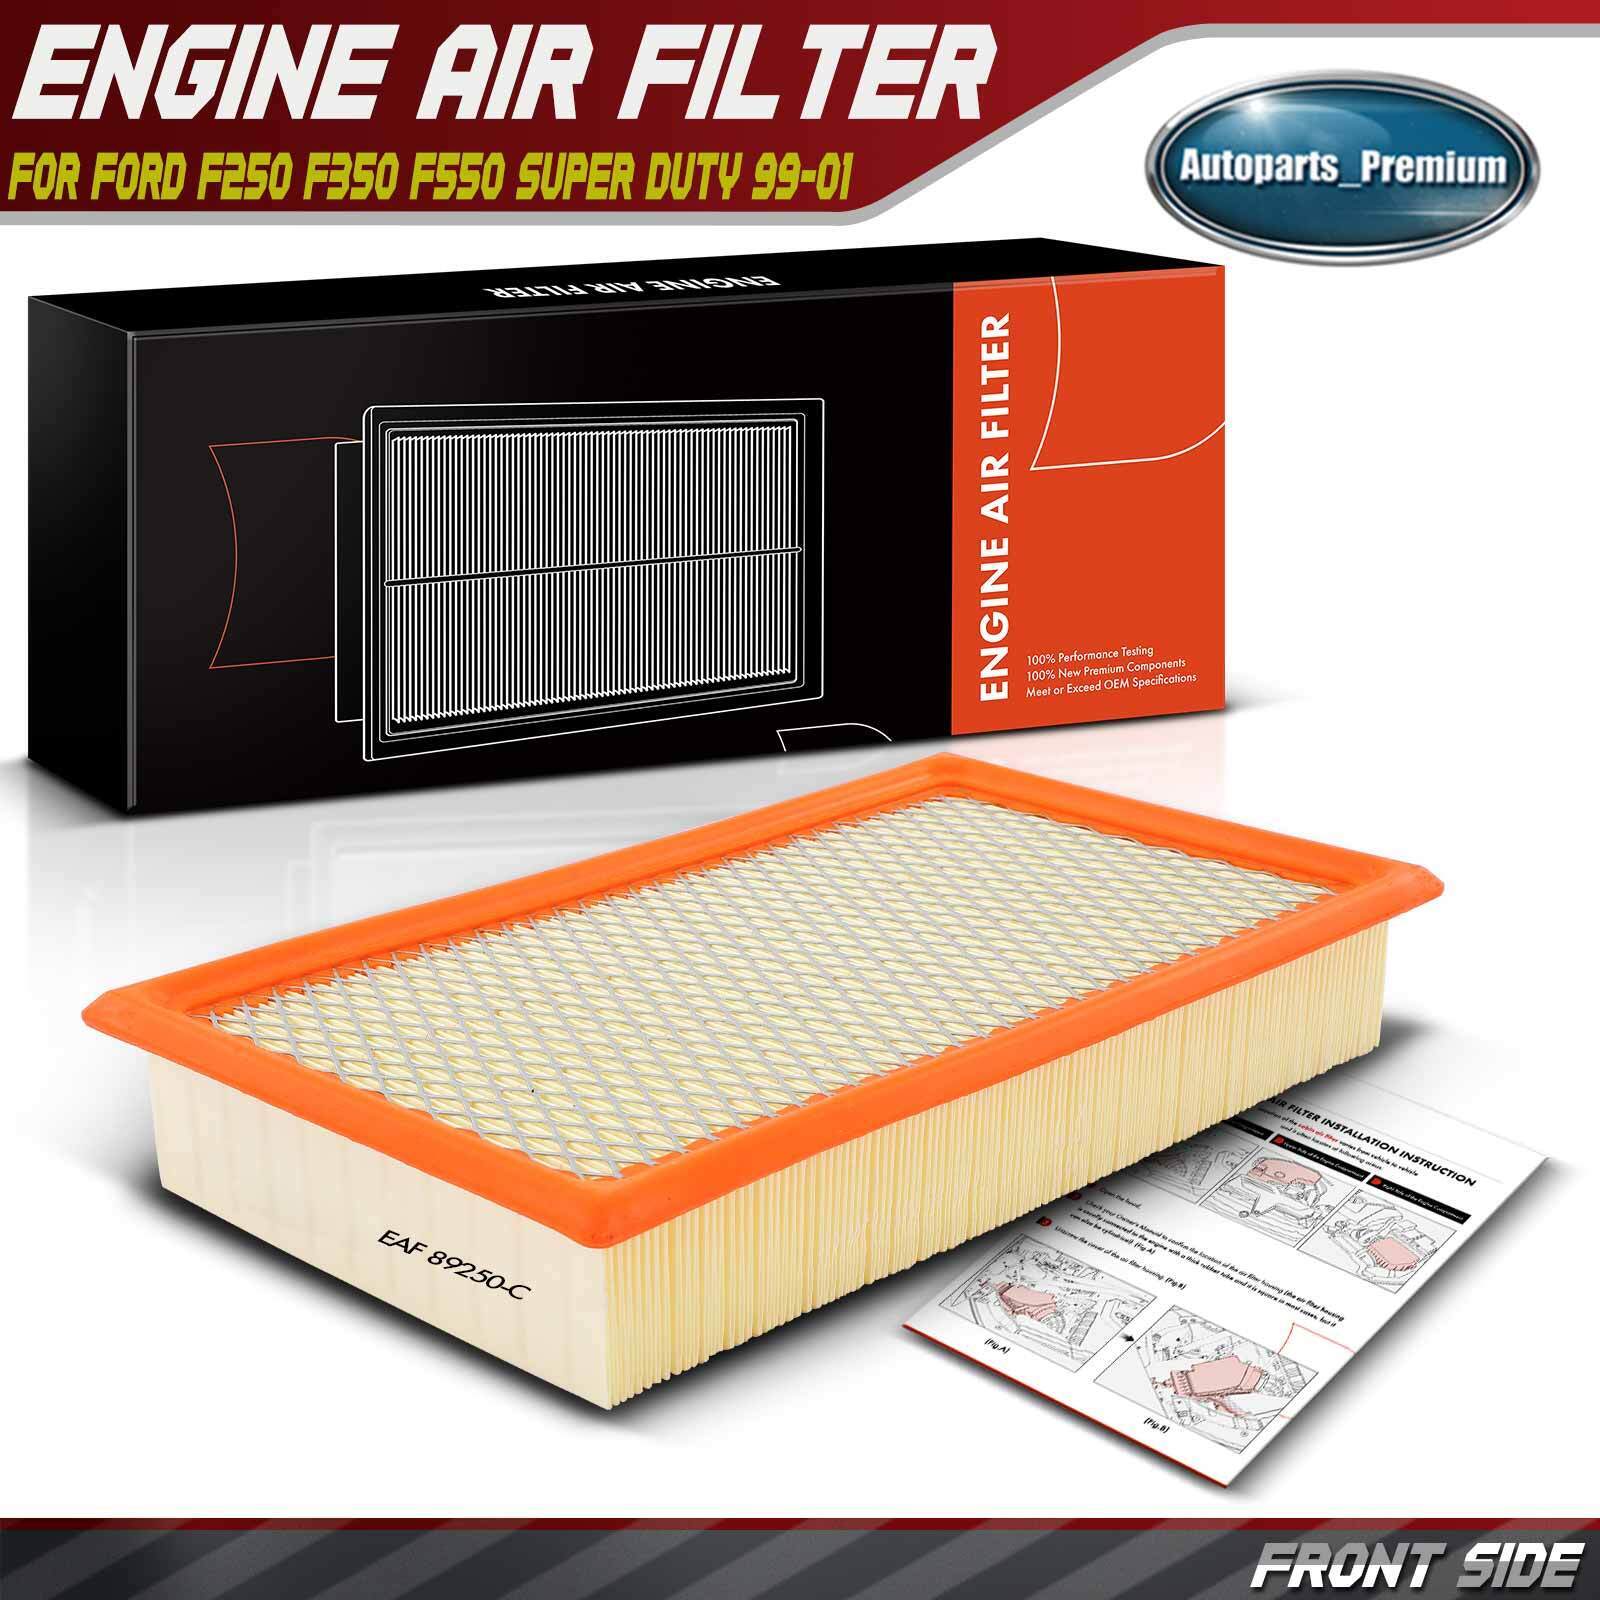 Engine Air Filter for Ford F-250 F350 F550 Super Duty 1999-2001 Excursion 7.3L